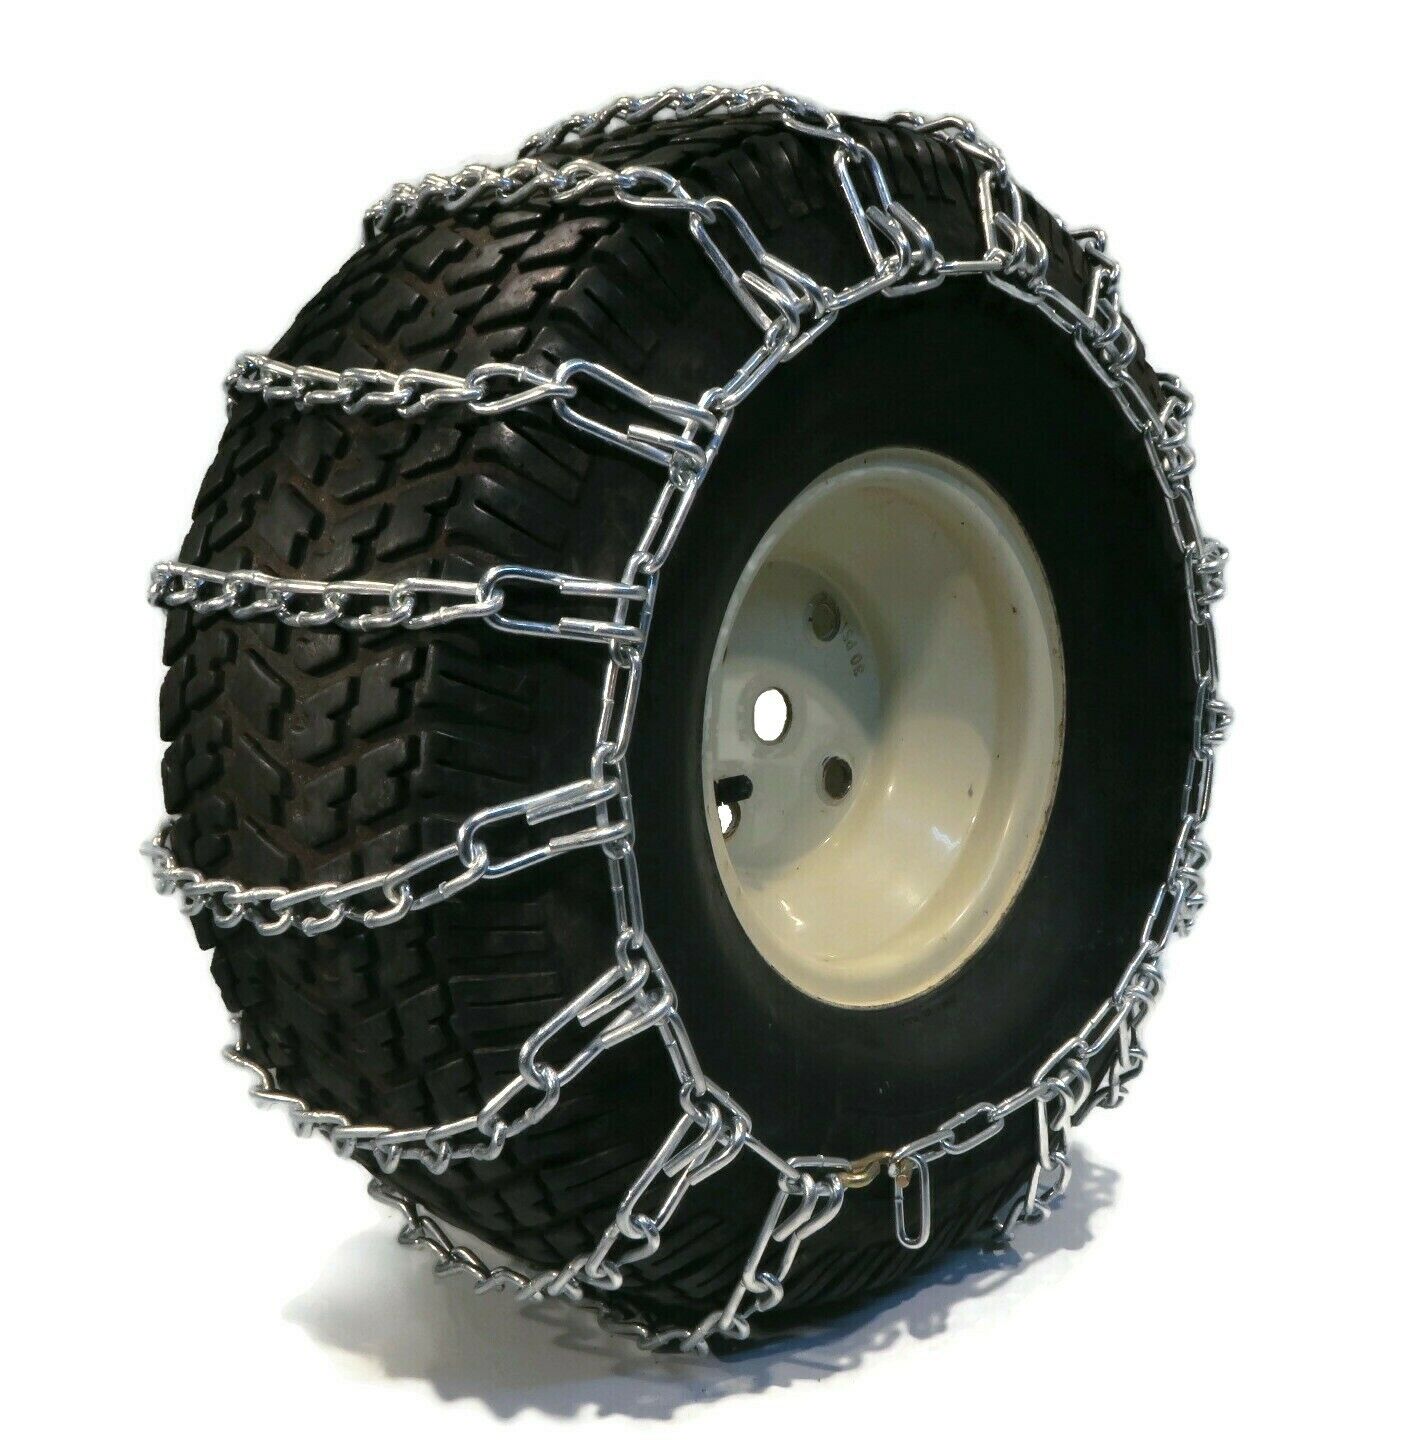 PAIR 2 Link TIRE CHAINS 26x12-12 for Simplicty Lawn Mower Garden Tractor Rider by The ROP Shop - image 3 of 6